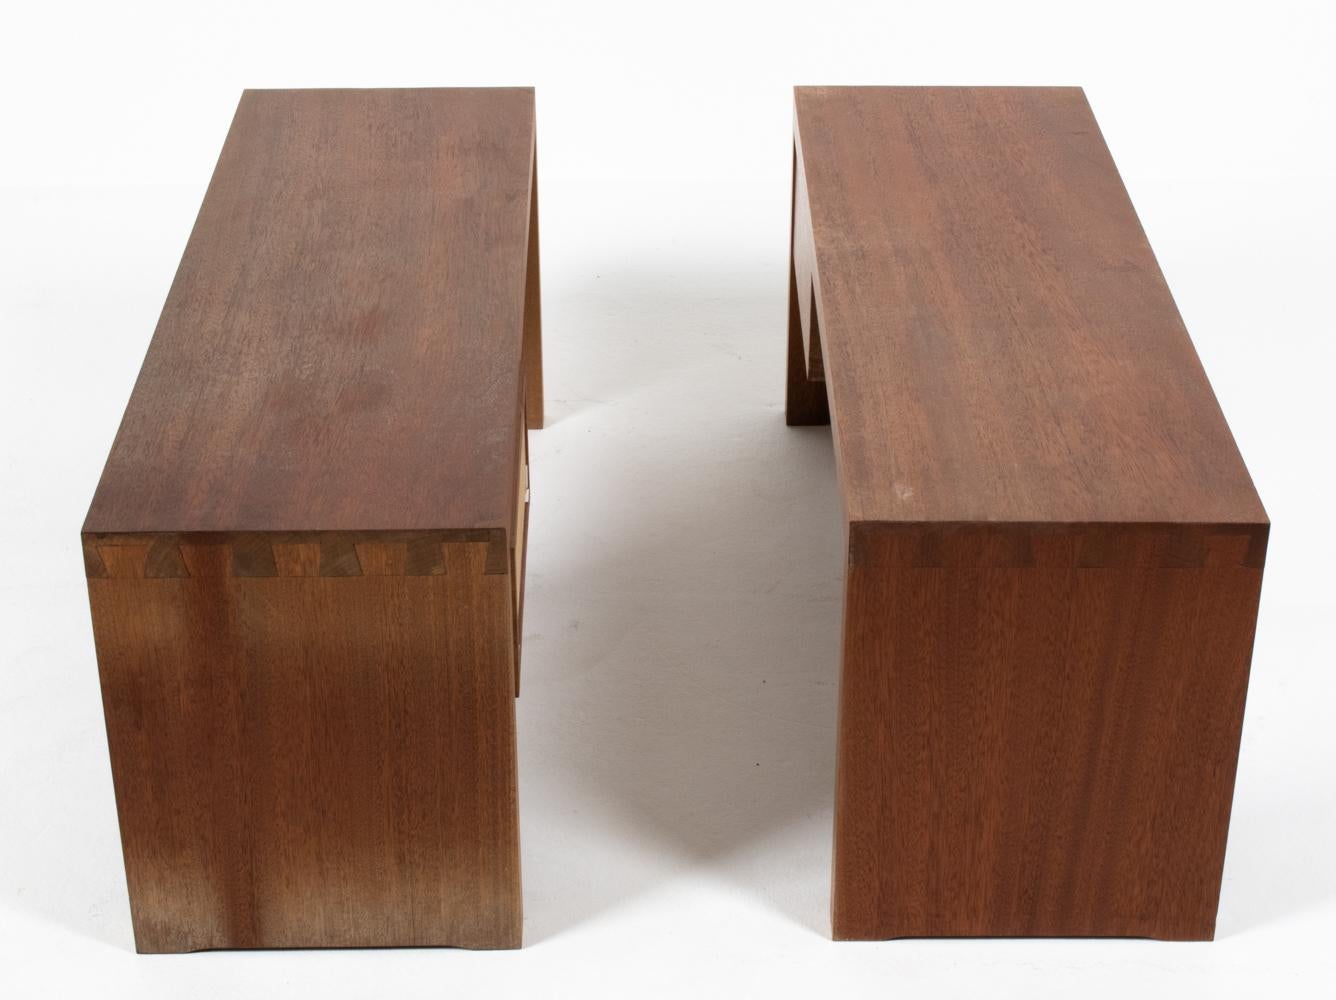 Pair of Mid-Century Modern Dovetailed Teak Nightstands or Benches For Sale 5